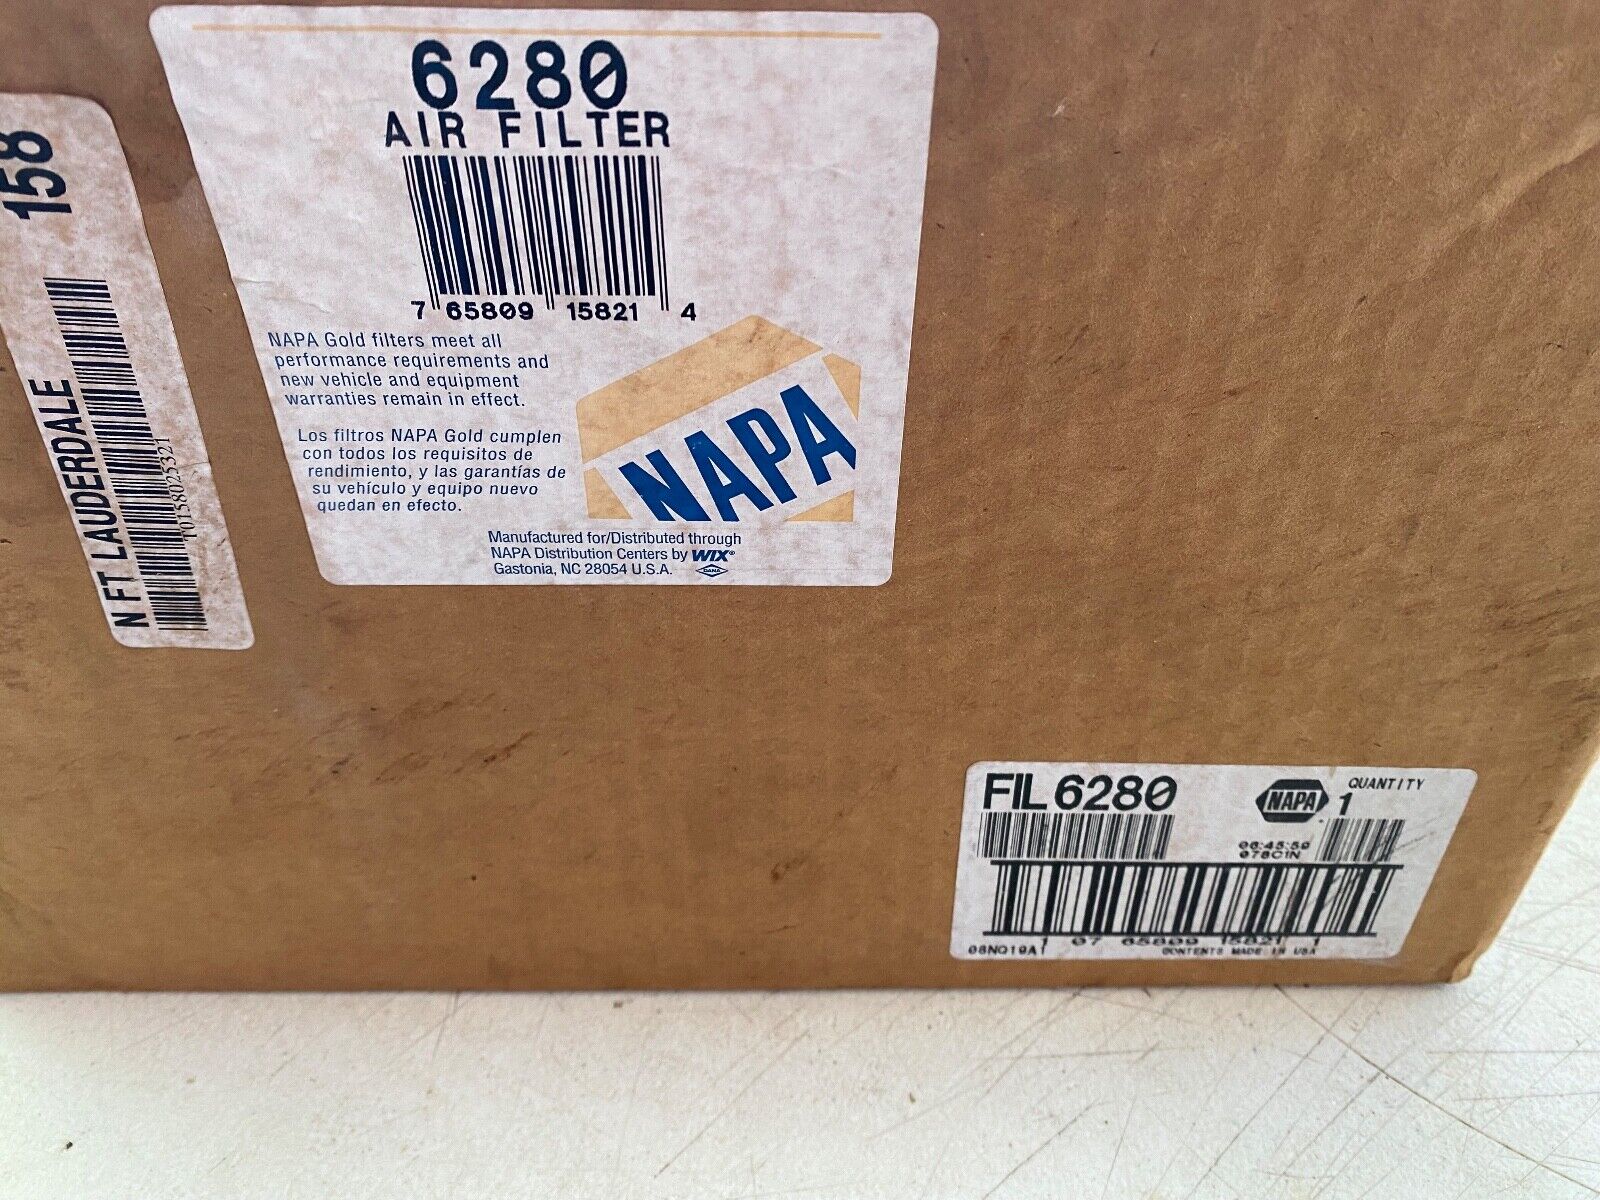 NAPA 6280 Air Filter for Heavy Trucks & Blue Bird School Buses - Wix 46280 - NEW